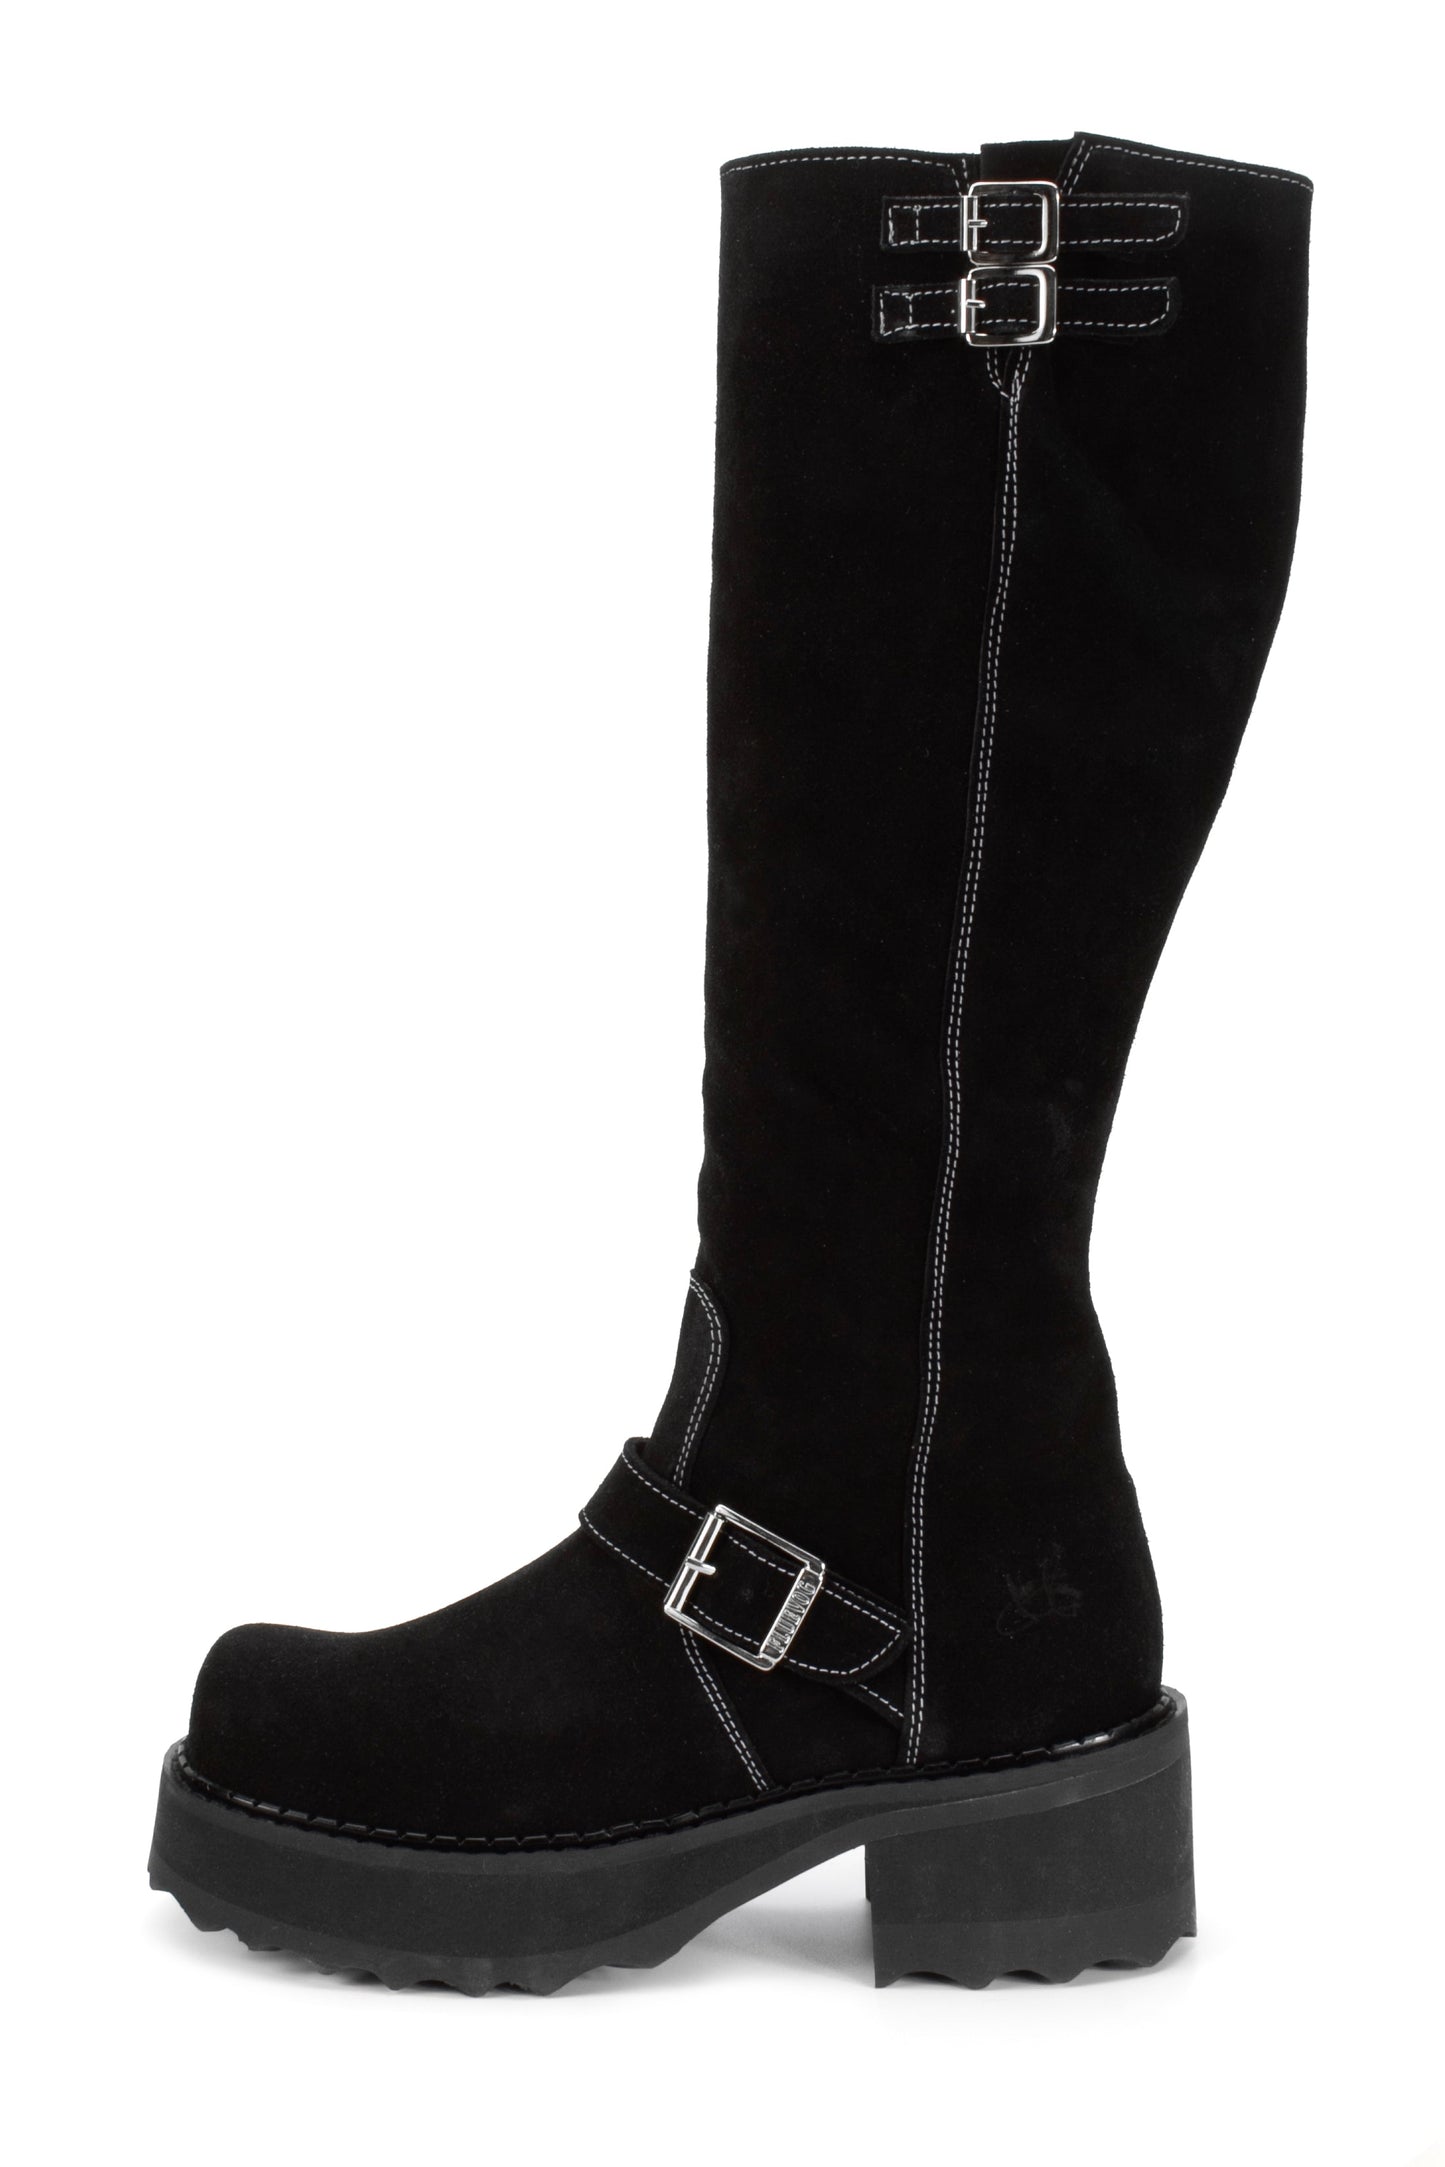 Black suede Boot, under-the-knee-high, high sole, white stiches for highlight